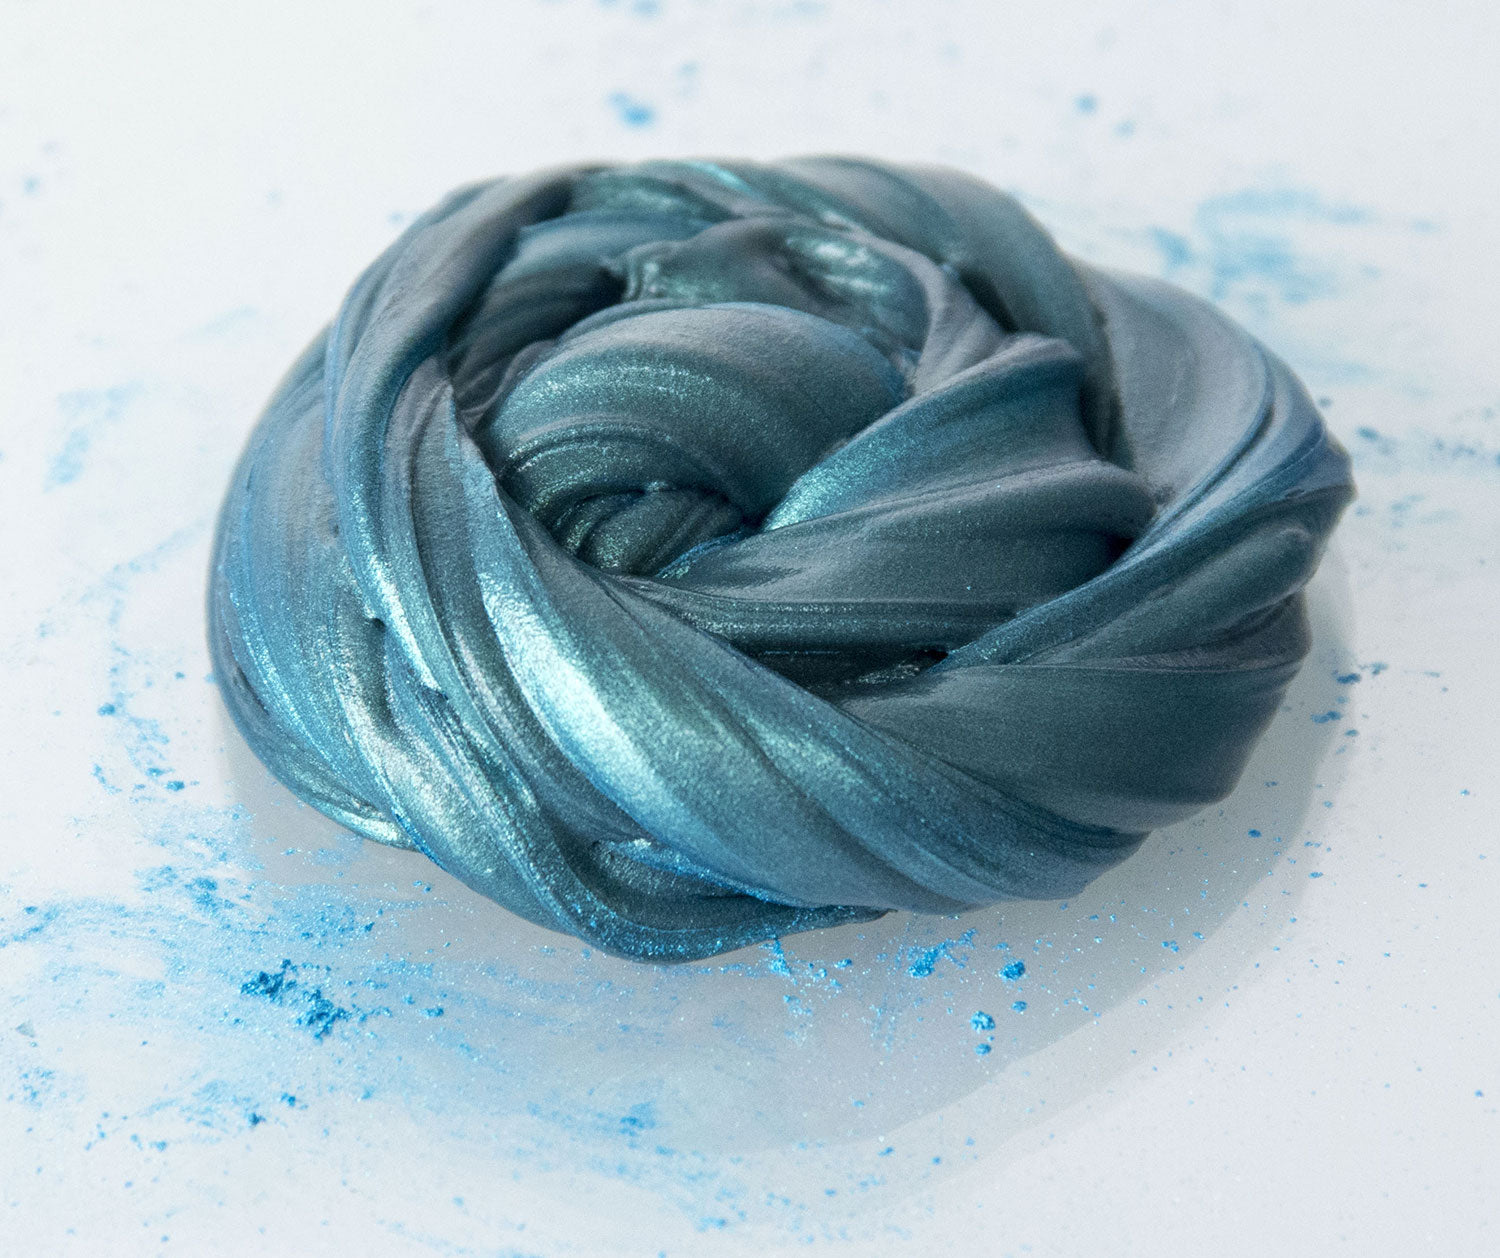 21g 'Blue Russet' 689 Pearl Ex Powdered Pigment by Jacquard